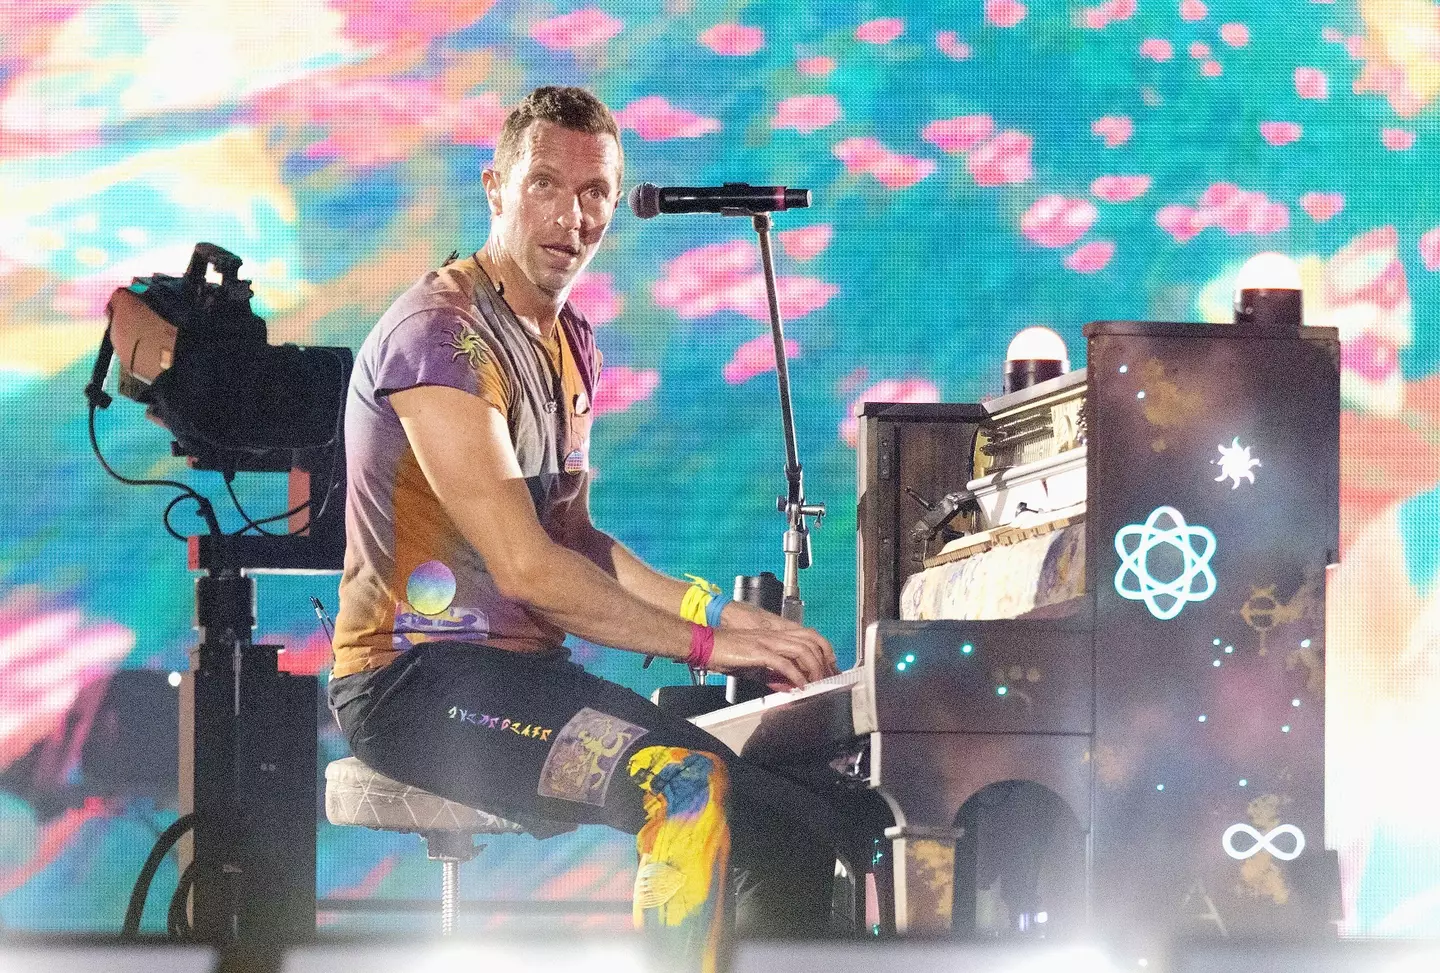 Chris Martin stopped a song midway through to tell fans to put their phones away.